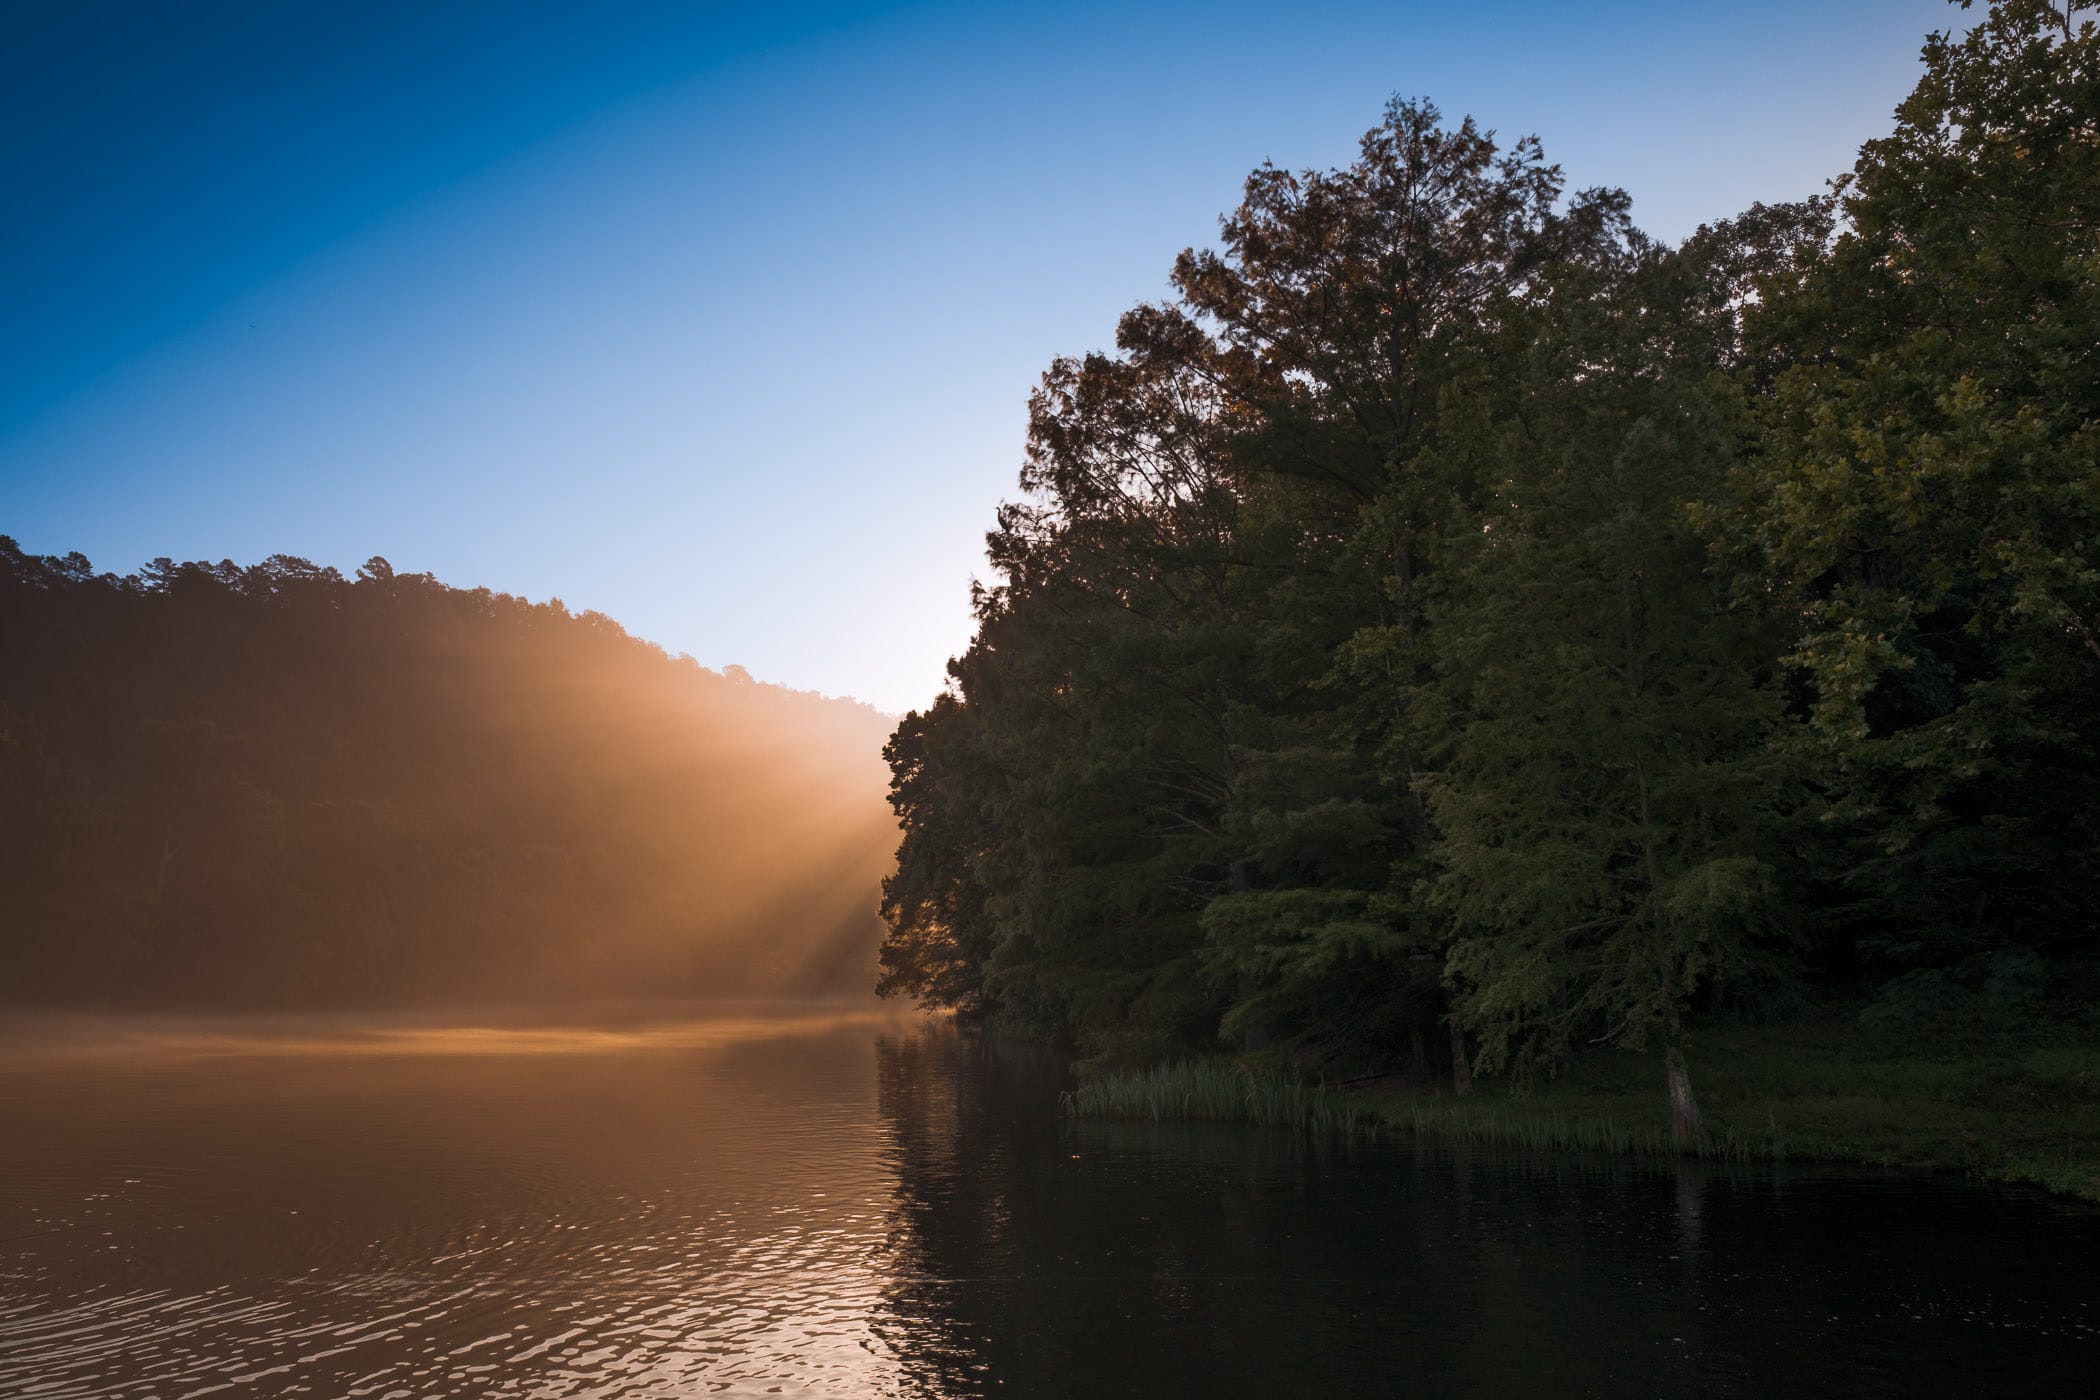 The sunrises on the far side a bend in the Mountain Fork River at Beavers Bend State Park, Oklahoma.